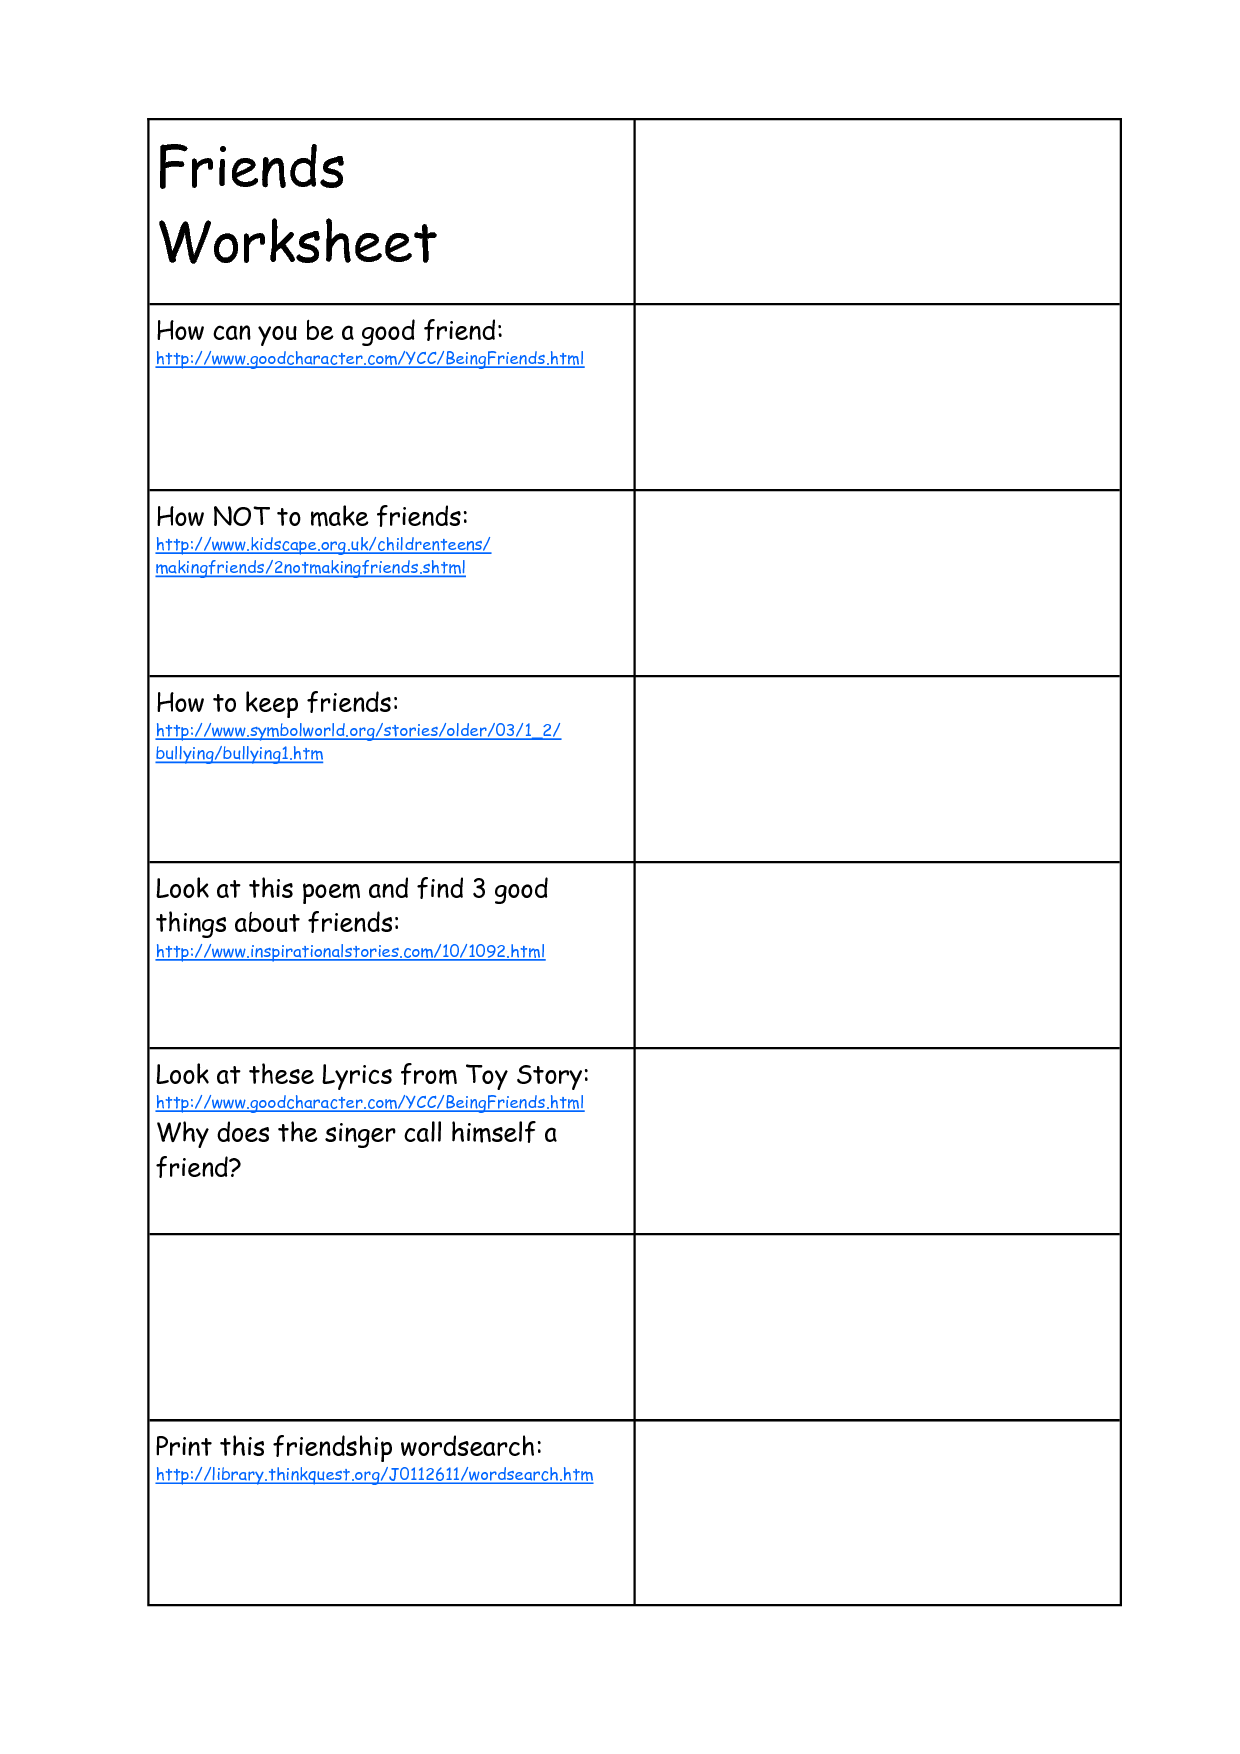 15 Best Images Of Find A Friend Worksheet All About My Friend Worksheet Friend Interview